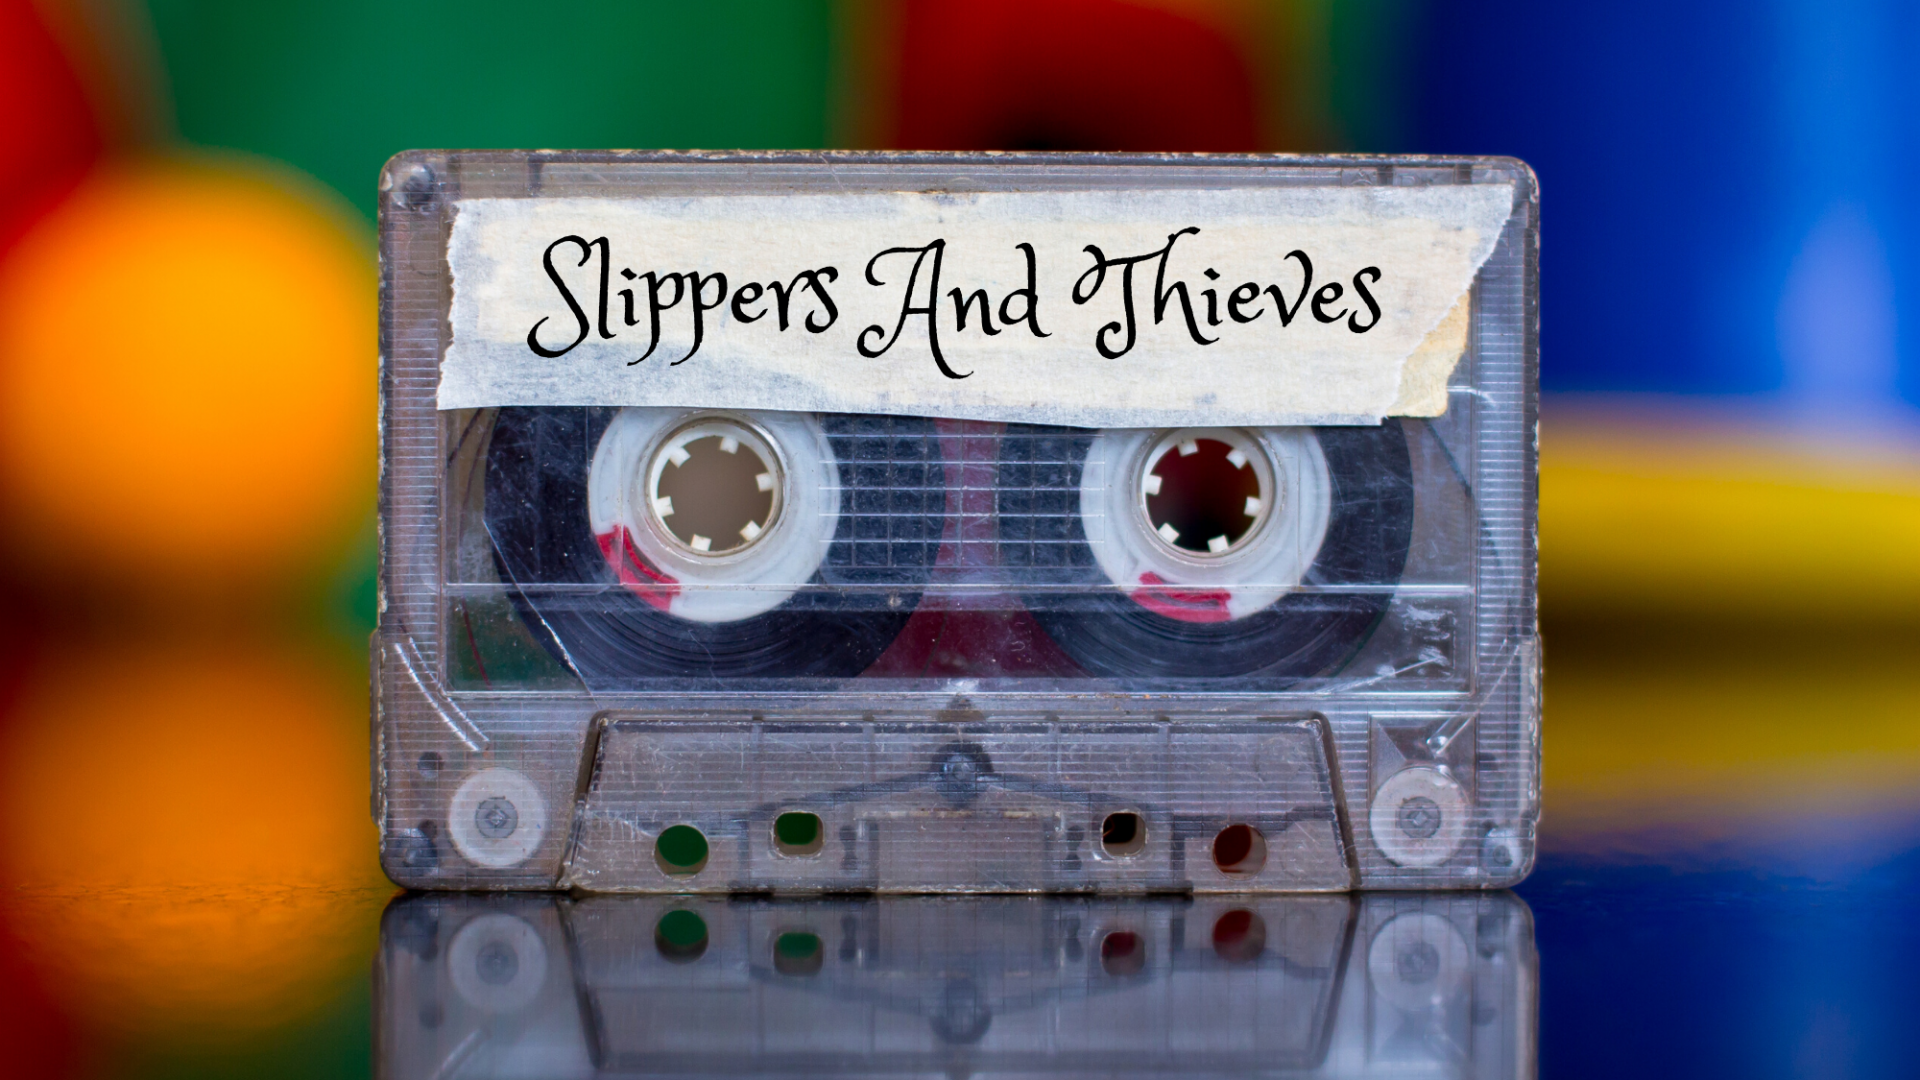 My Playlist: SLIPPERS AND THIEVES